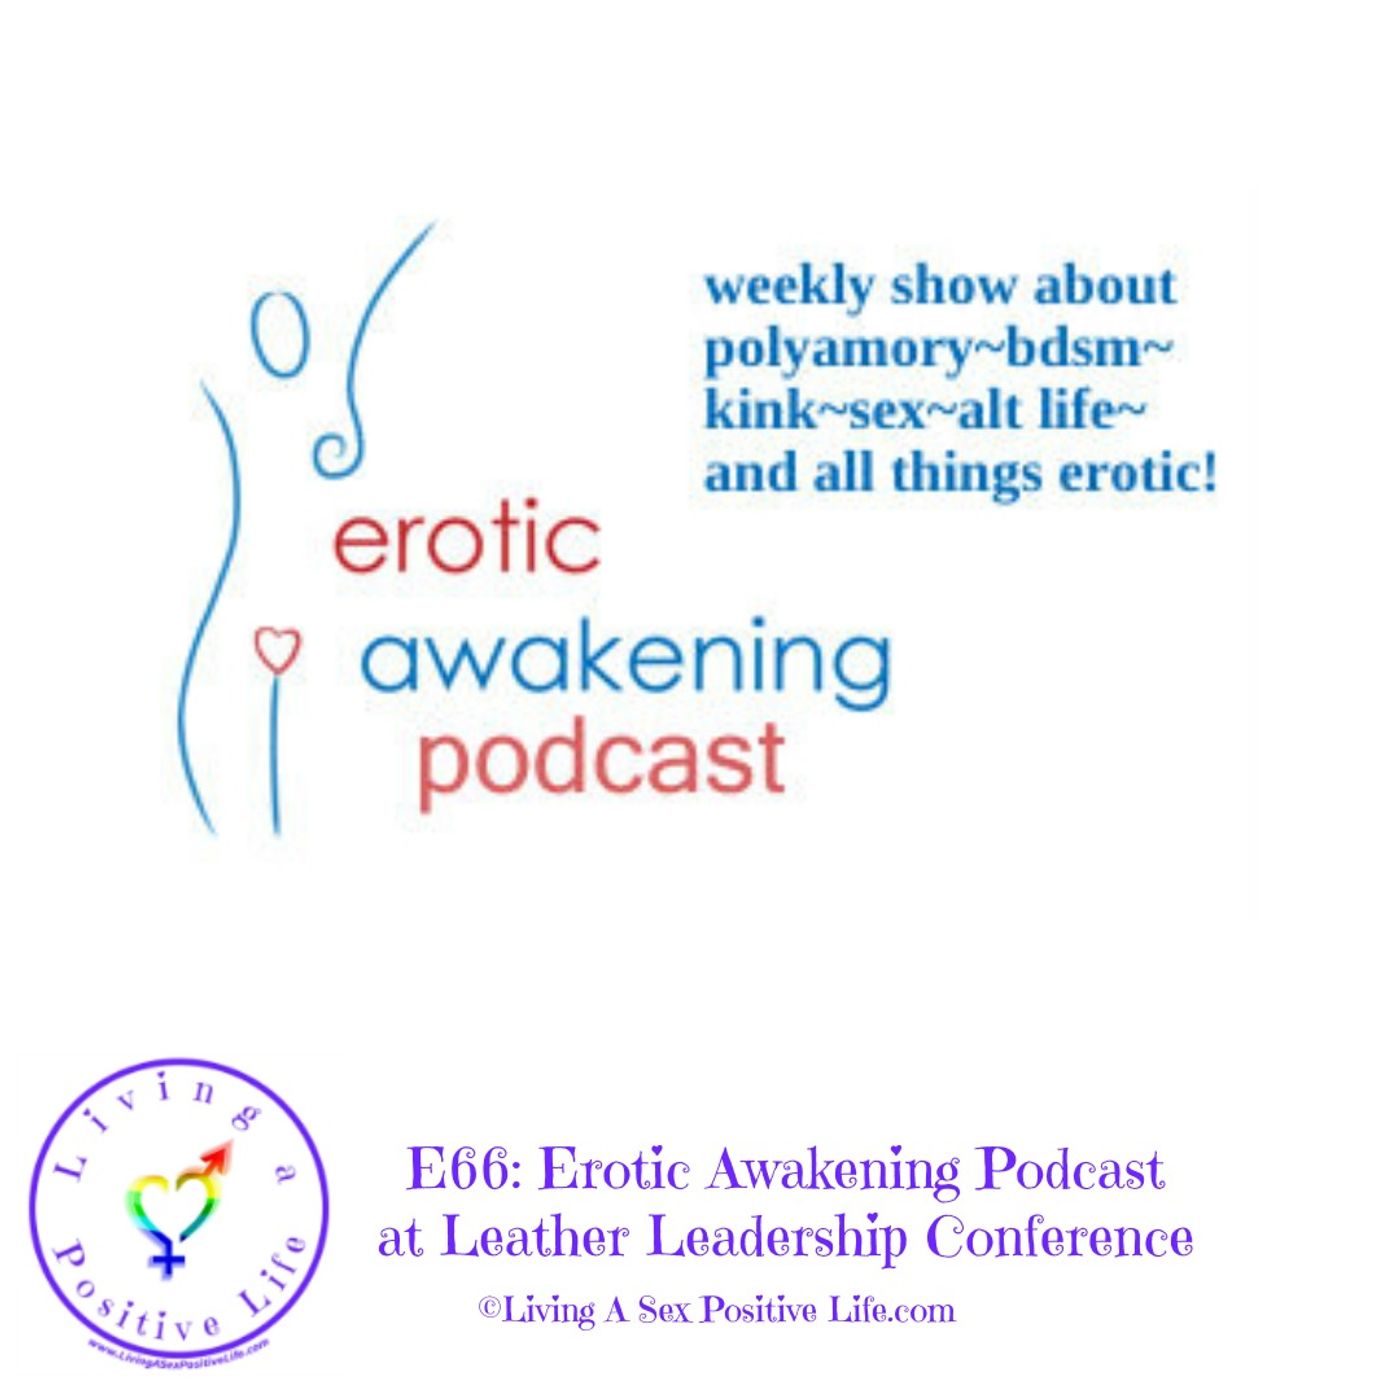 Sex Positive Me - E66: Erotic Awakening Podcast at Leather Leadership Conference